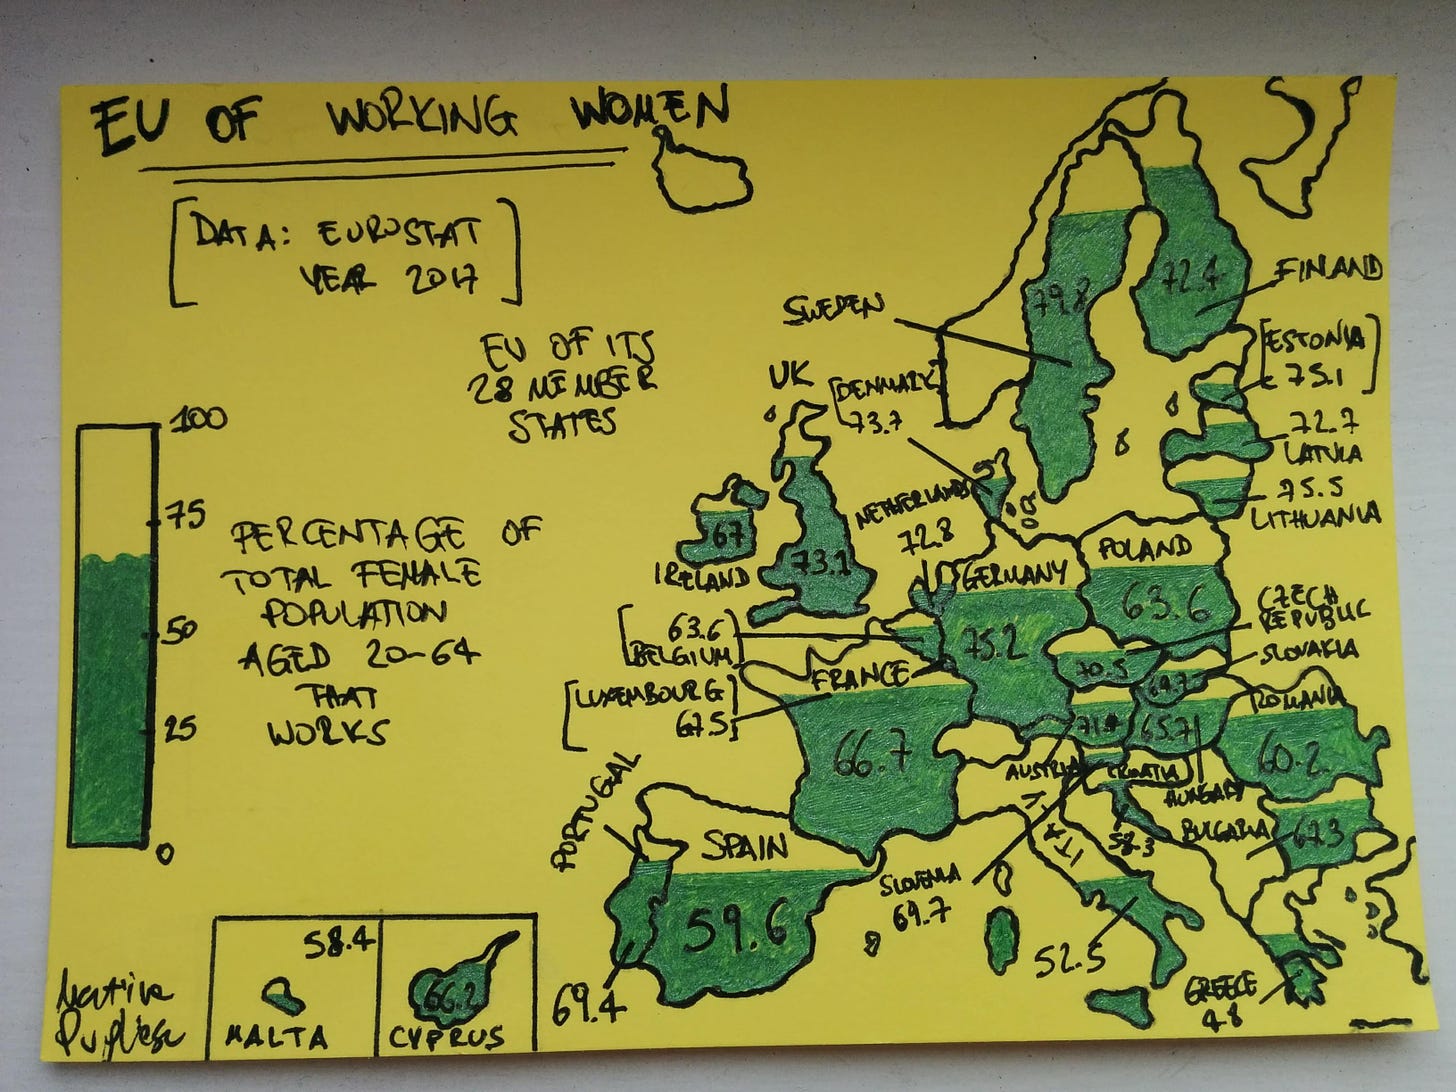 A hand-drawn map of the EU where each country is coloured based on the percentage of women that work. It shows that these percentages are around 70% for Northern European countries and linger around 50-60% for Souther European ones.